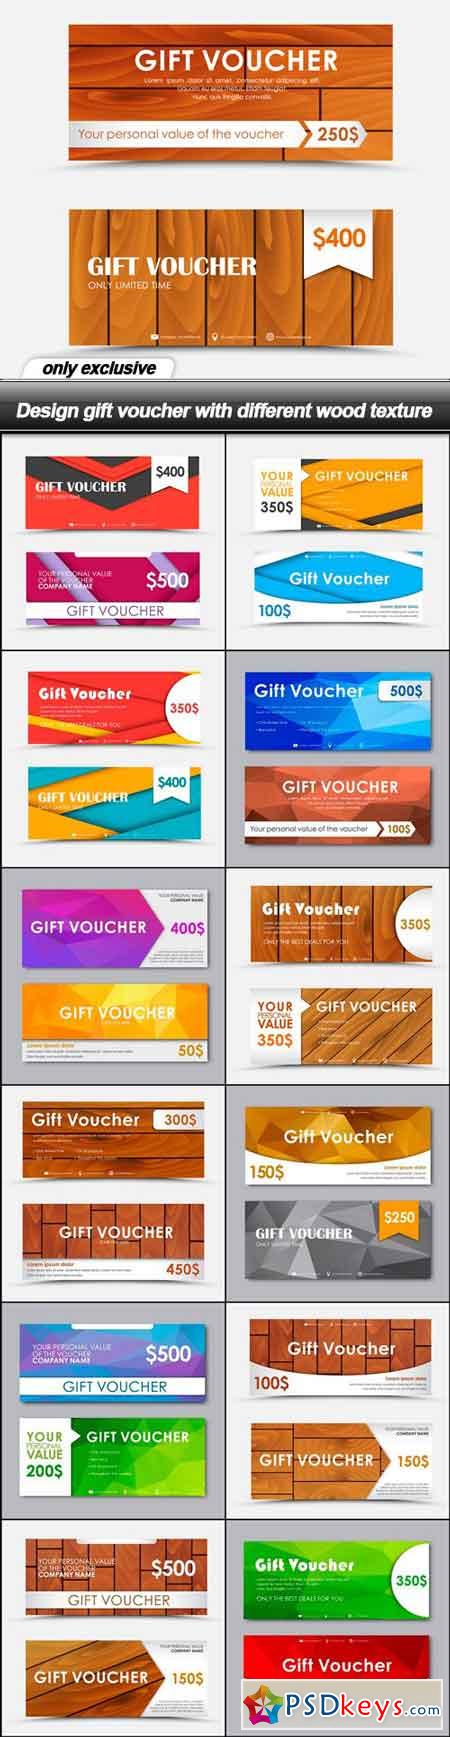 Design gift voucher with different wood texture - 13 EPS